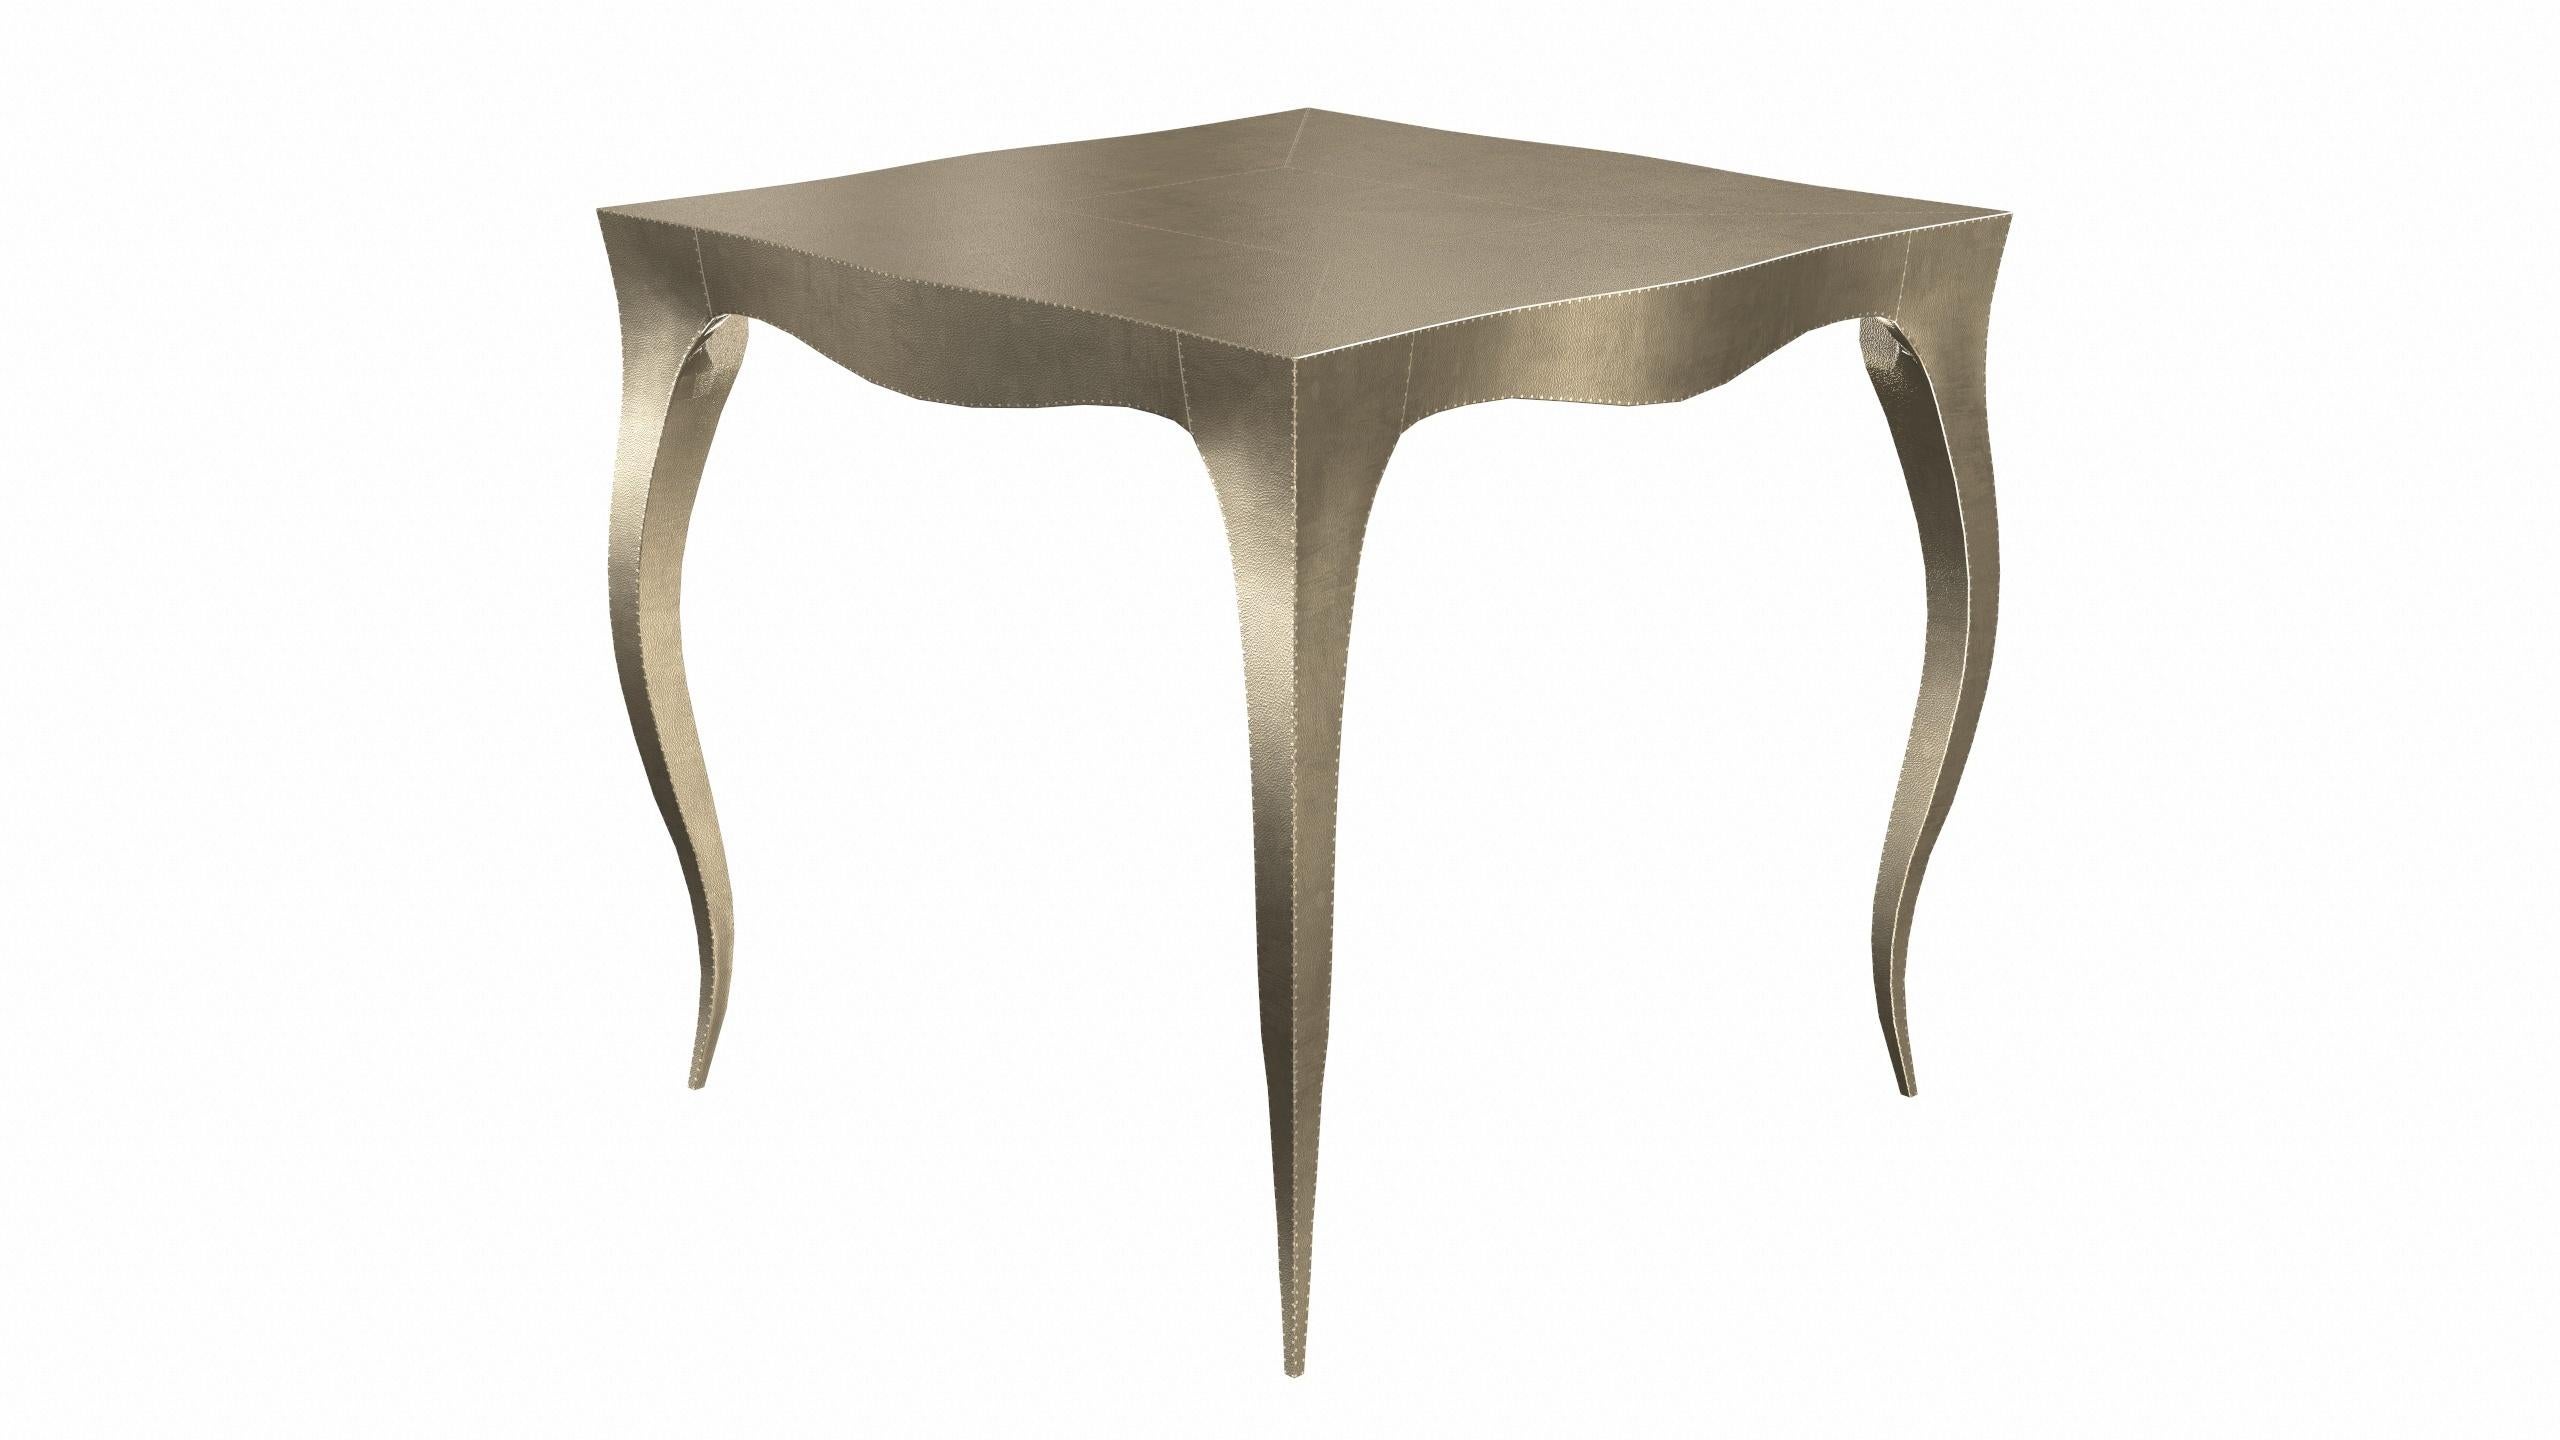 Metalwork Louise Art Deco Center Tables Fine Hammered Brass by Paul Mathieu for S. Odegard For Sale